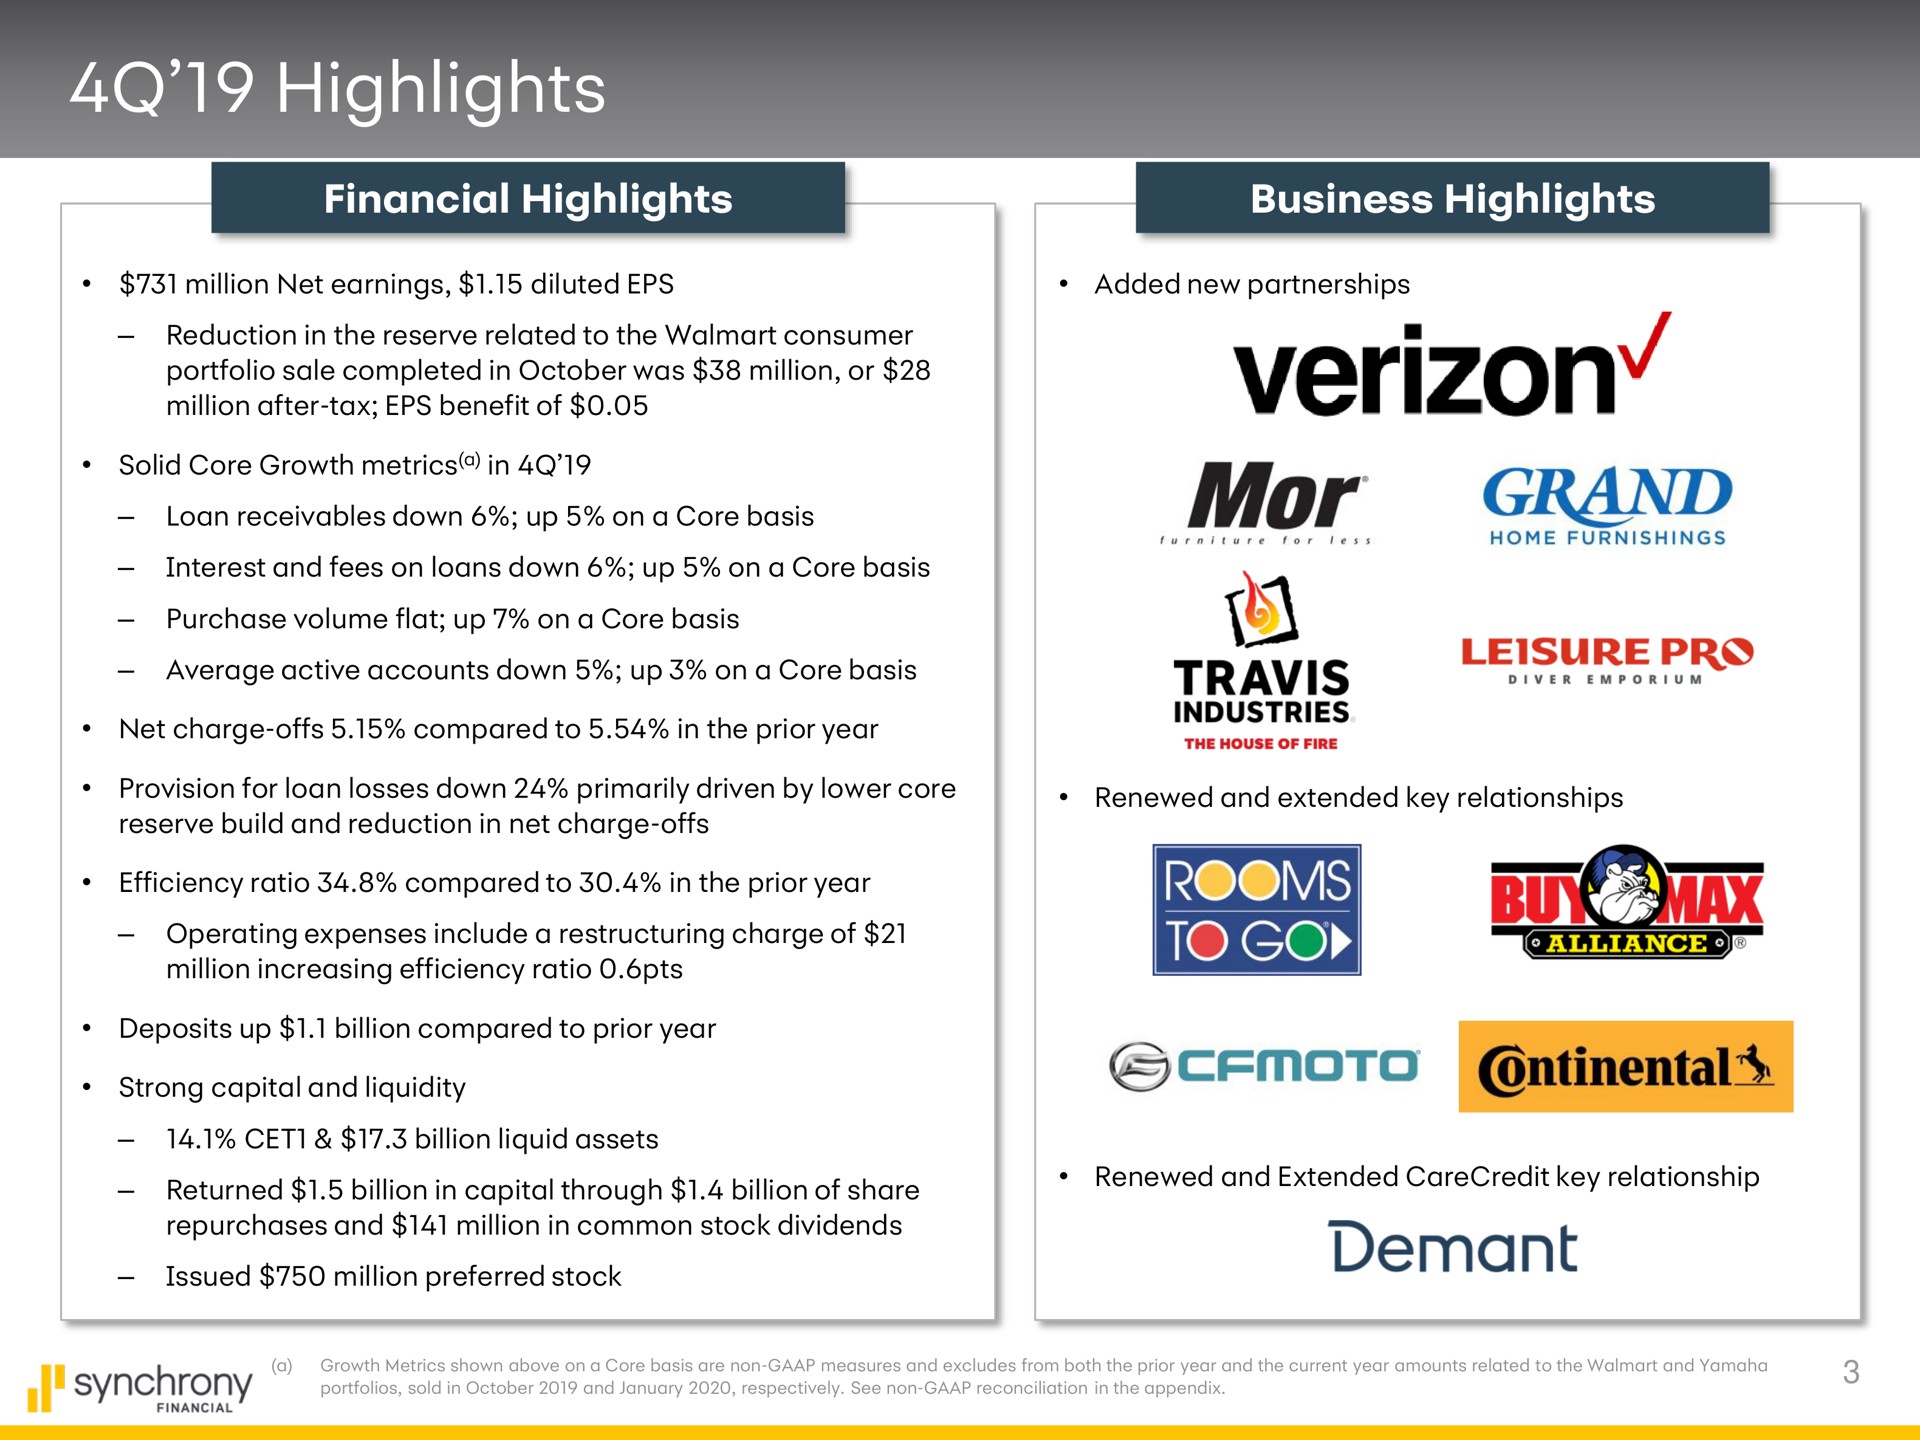 highlights mor a travis industries grand leisure pro | Synchrony Financial